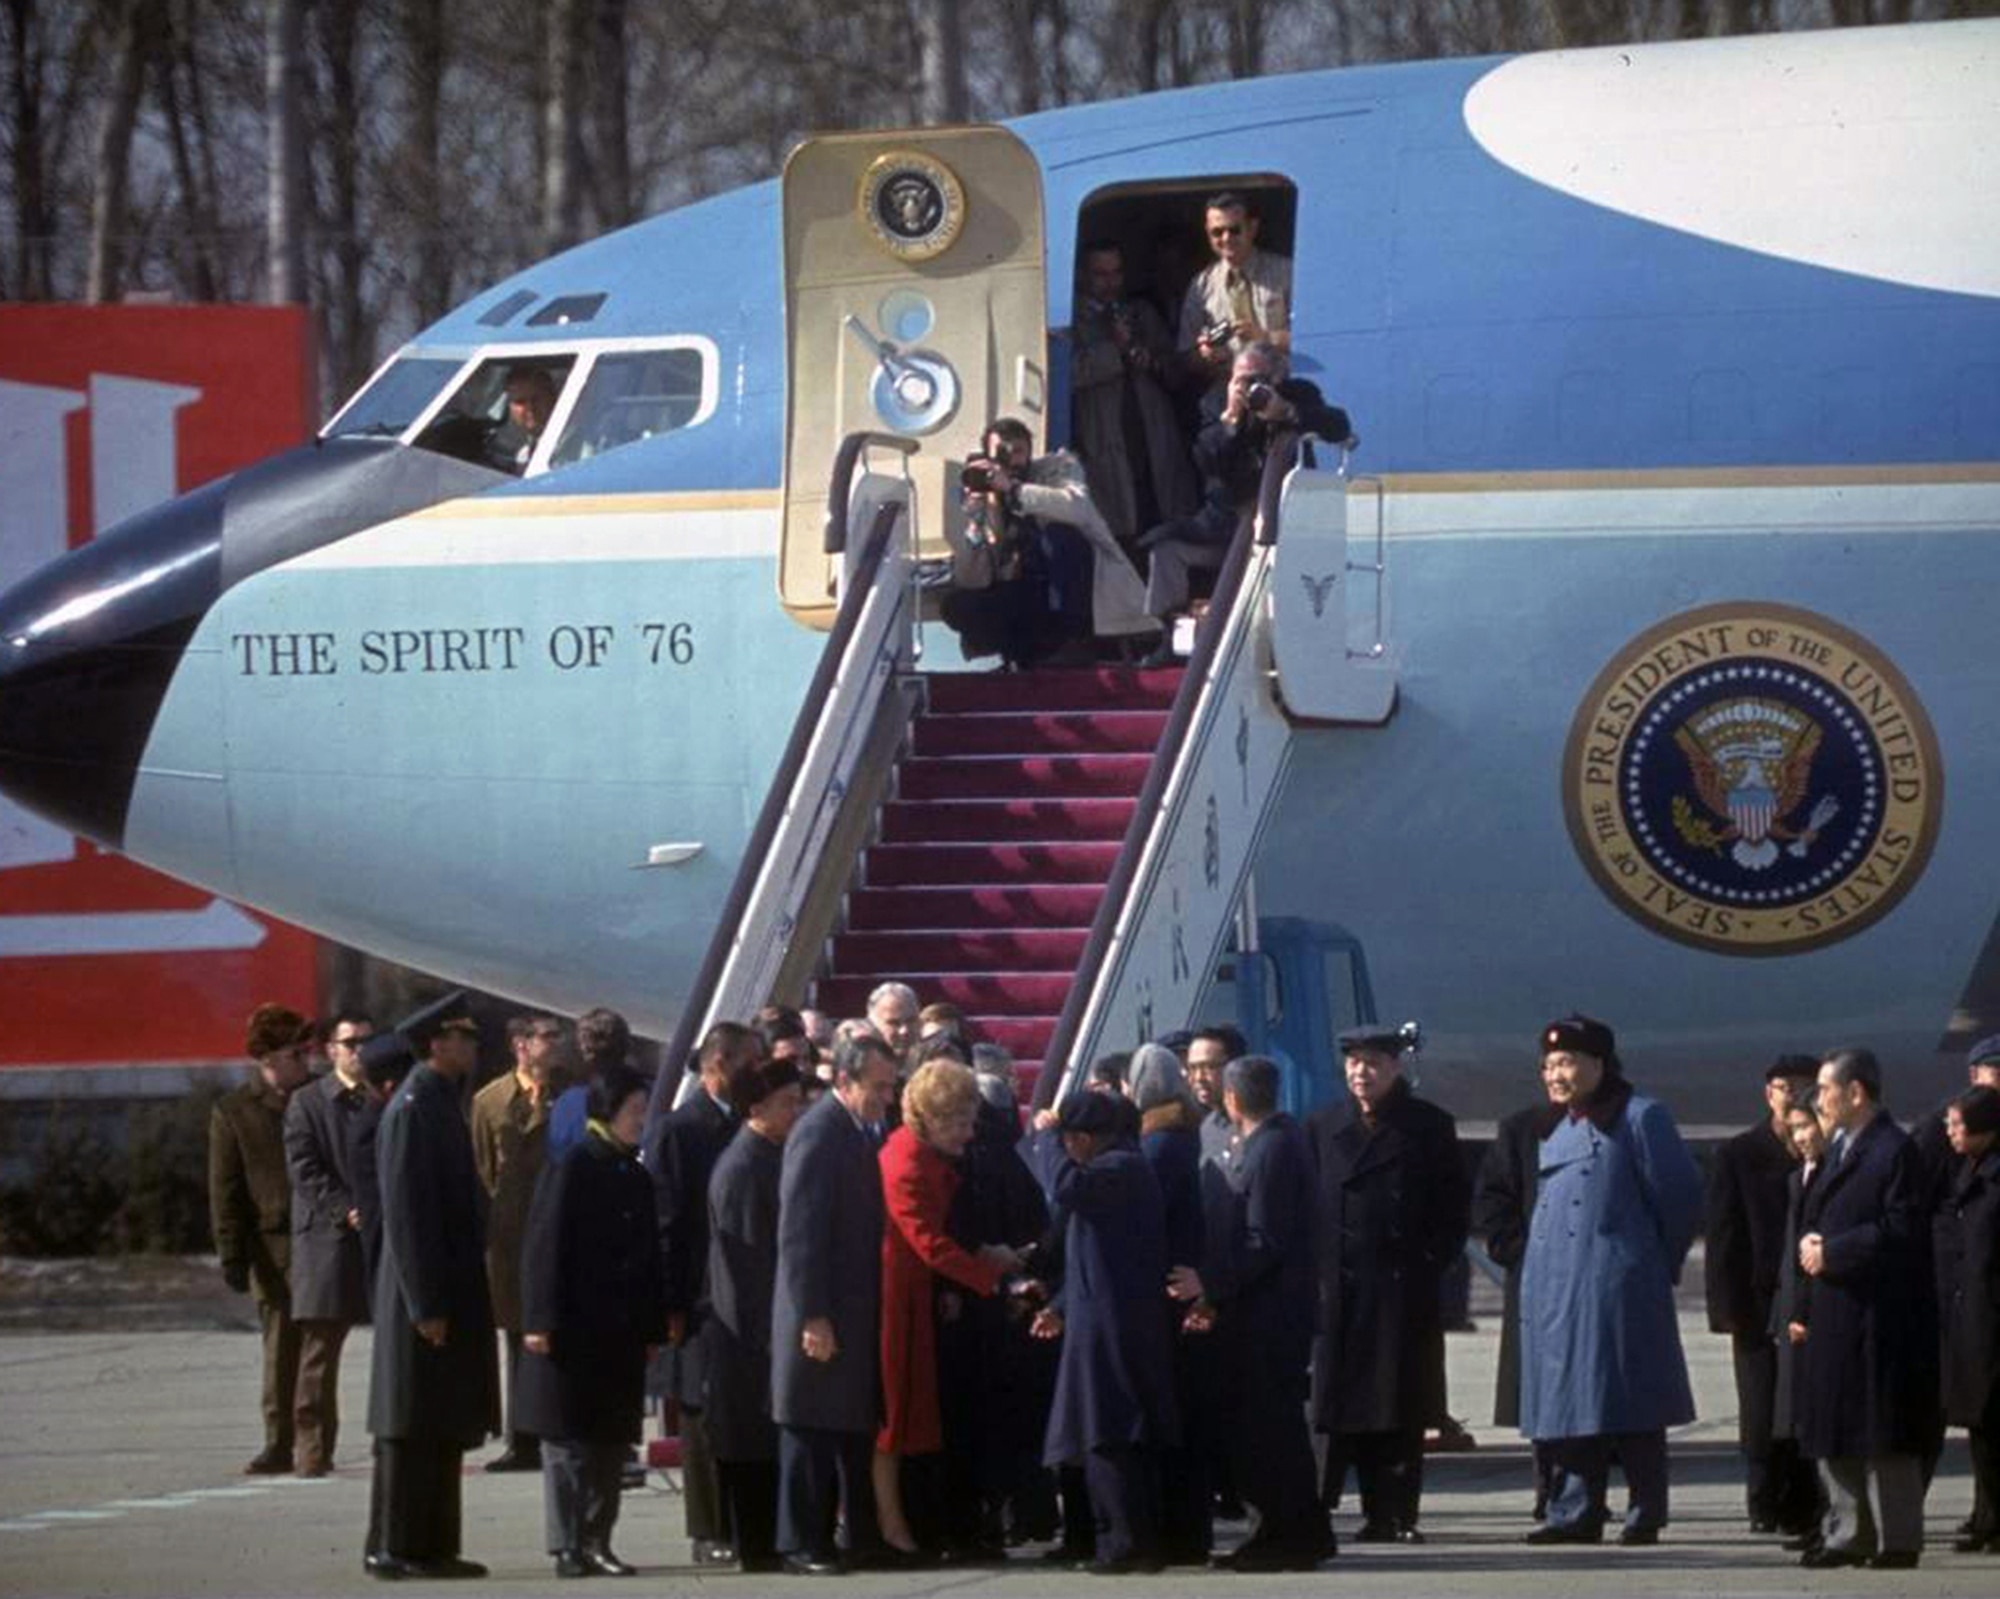 President and Mrs. Nixon are met by People’s Republic of China Premier Zhou Enlai. For a short period, President Nixon renamed SAM 26000 as "The Spirit of 76" in honor of the nation’s bicentennial. (Courtesy of Time Inc.)